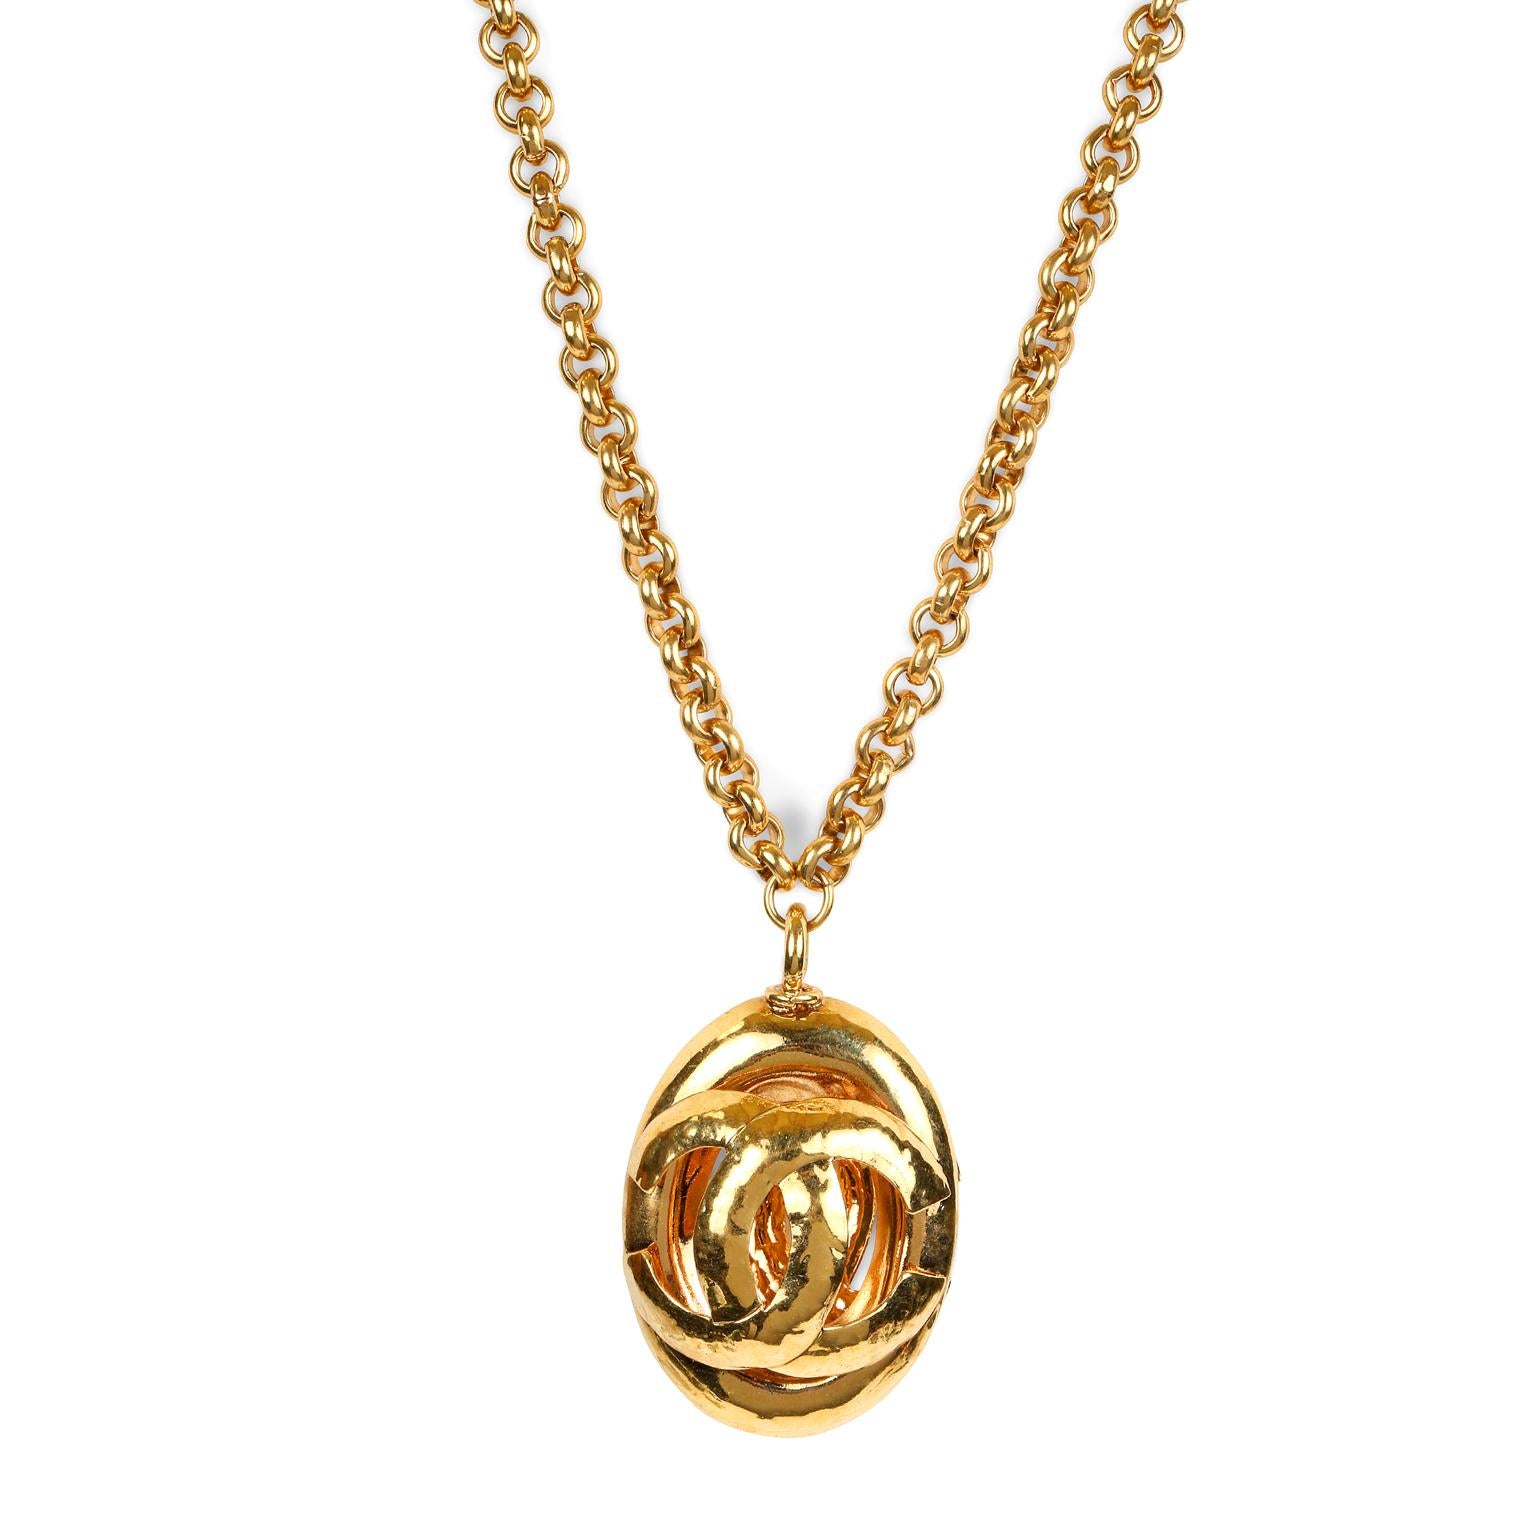 This authentic Chanel Gold CC Oval Pendant Necklace is in excellent condition from the early 1990’s.   A large gold tone oval CC medallion dangles from a rolo style chain. Intentionally hammered finish.  Chain approximately 30 inches/ pendant 2.5